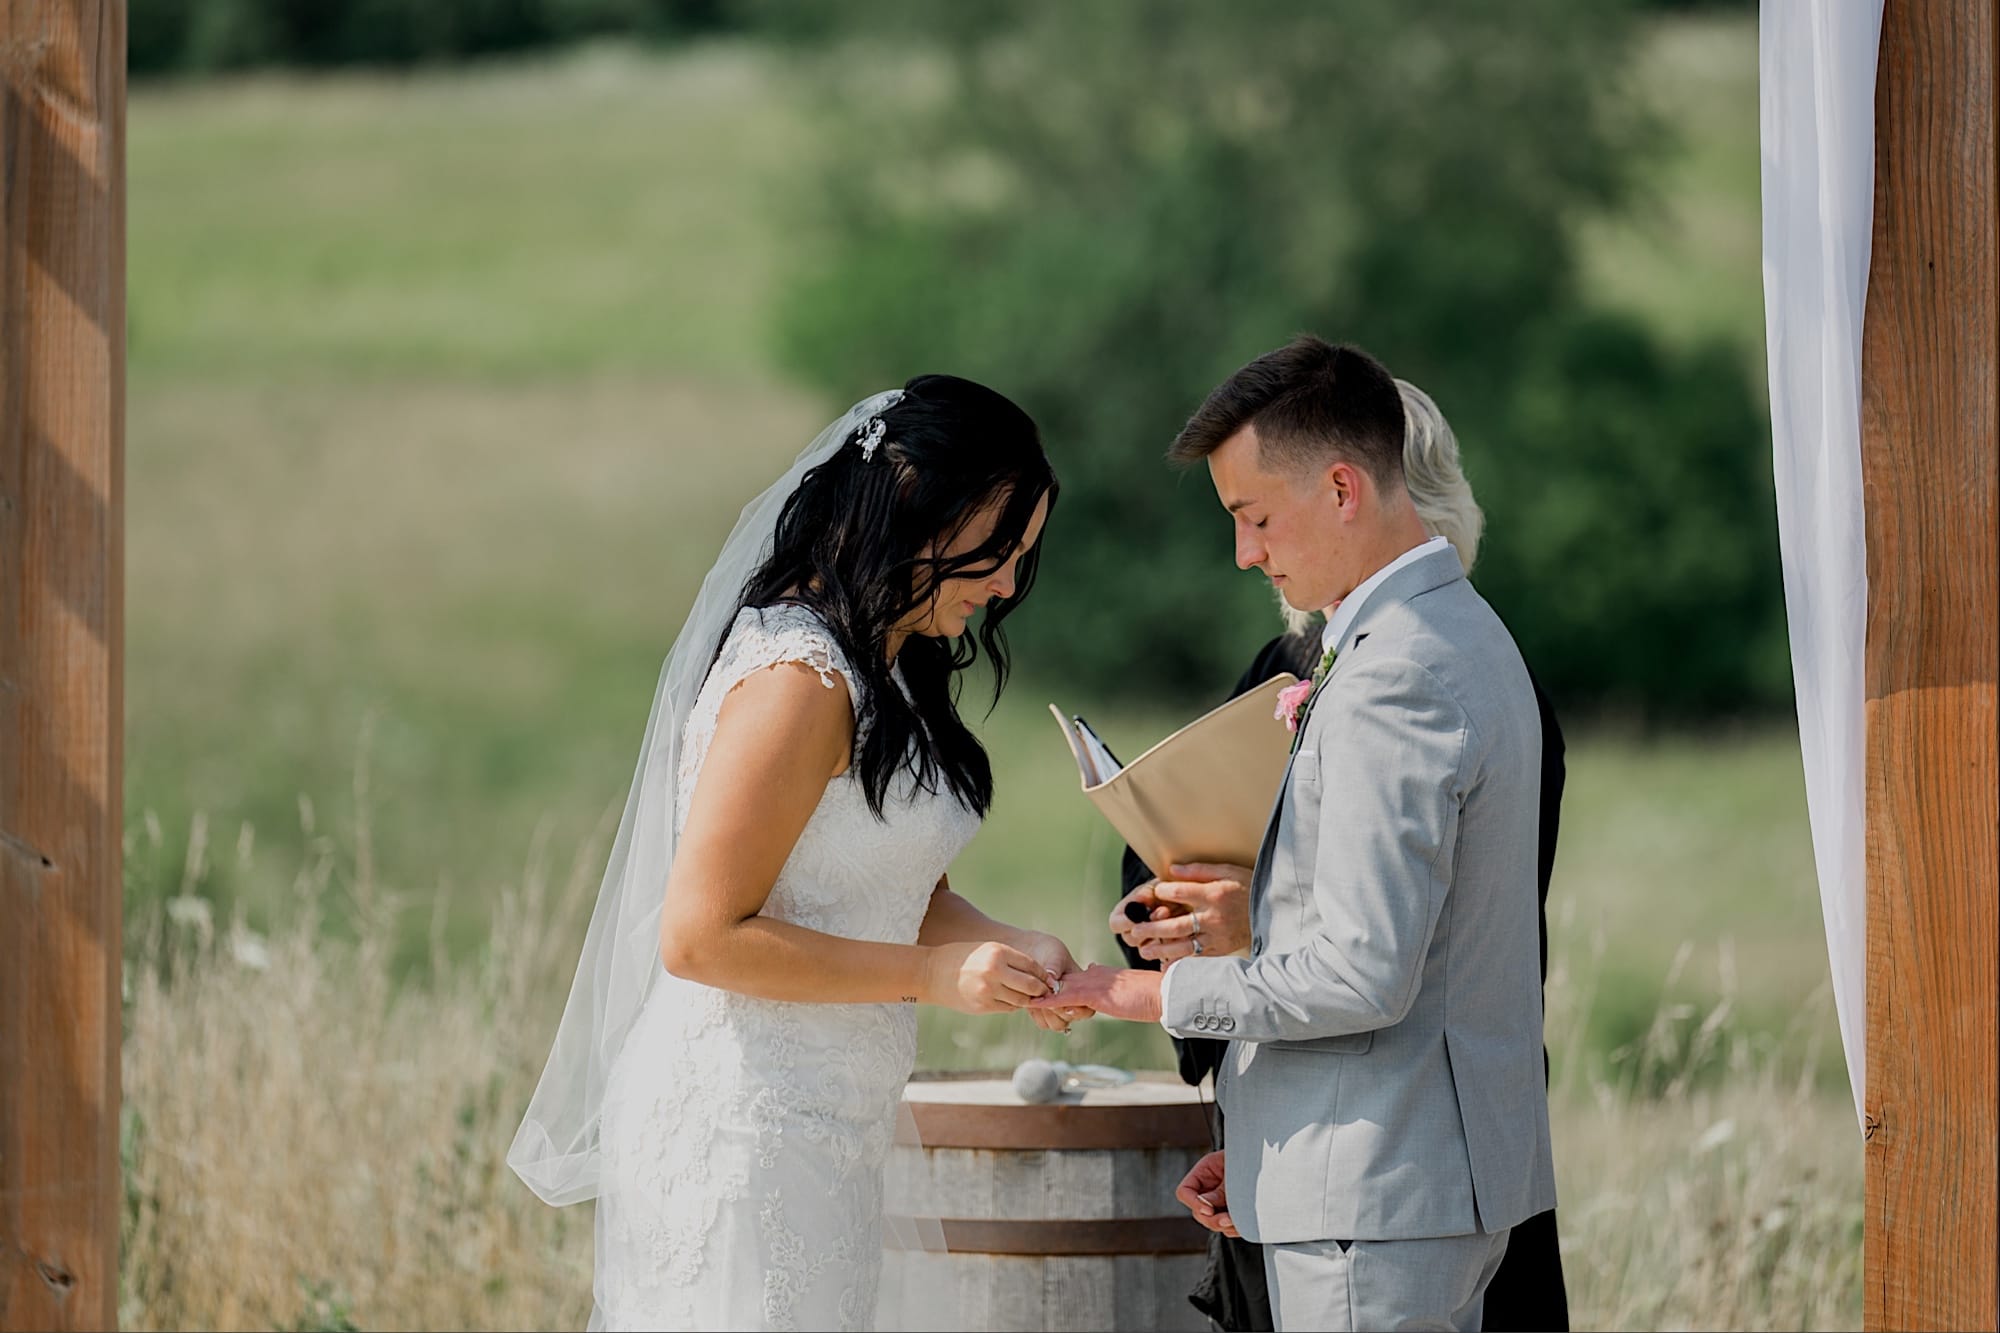 exchanging rings at carper winery wedding ceremony